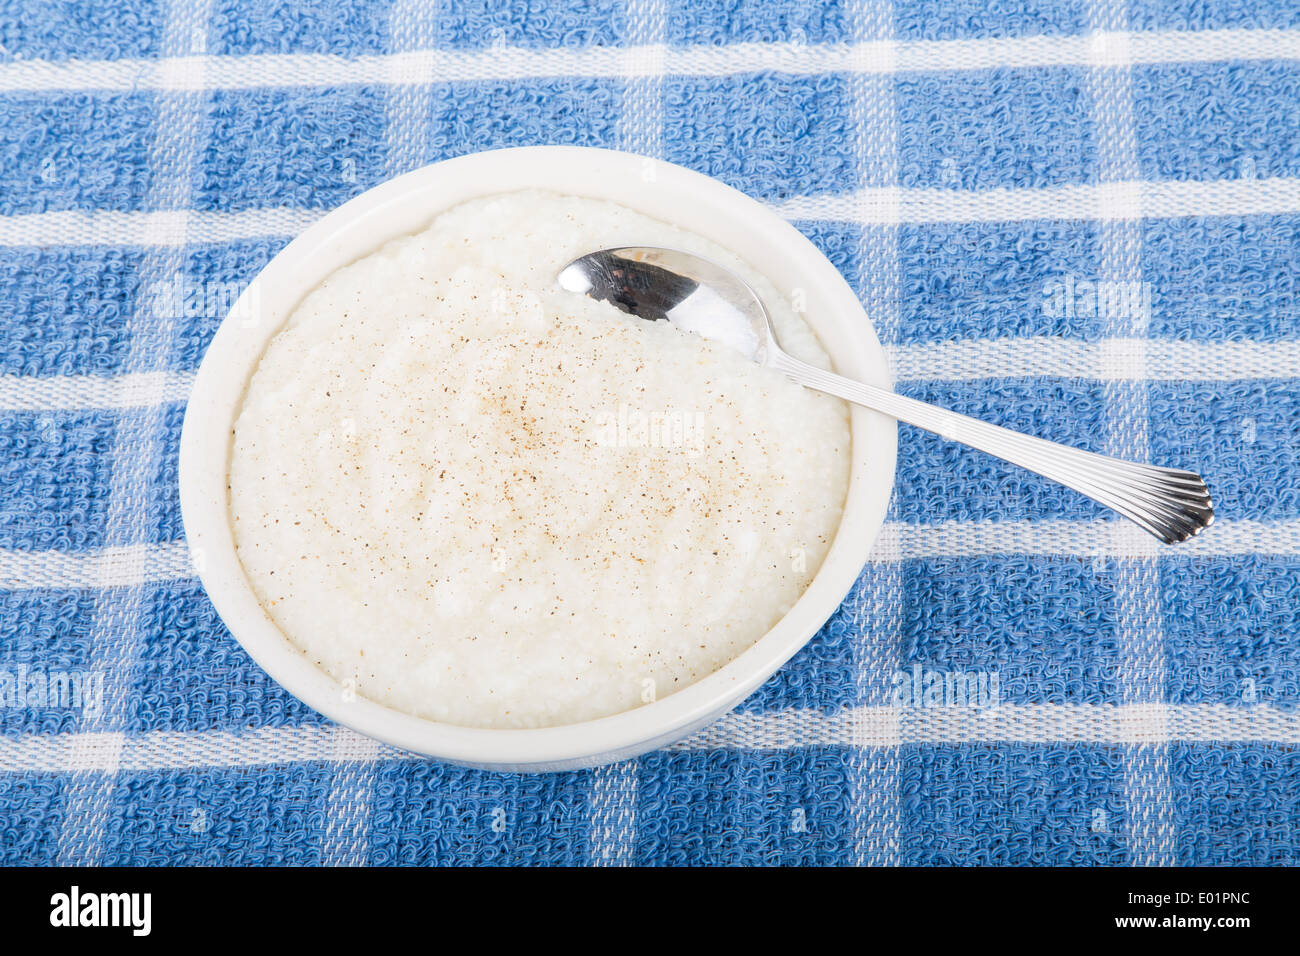 A bowl of fresh, hot grits with a spoon Stock Photo